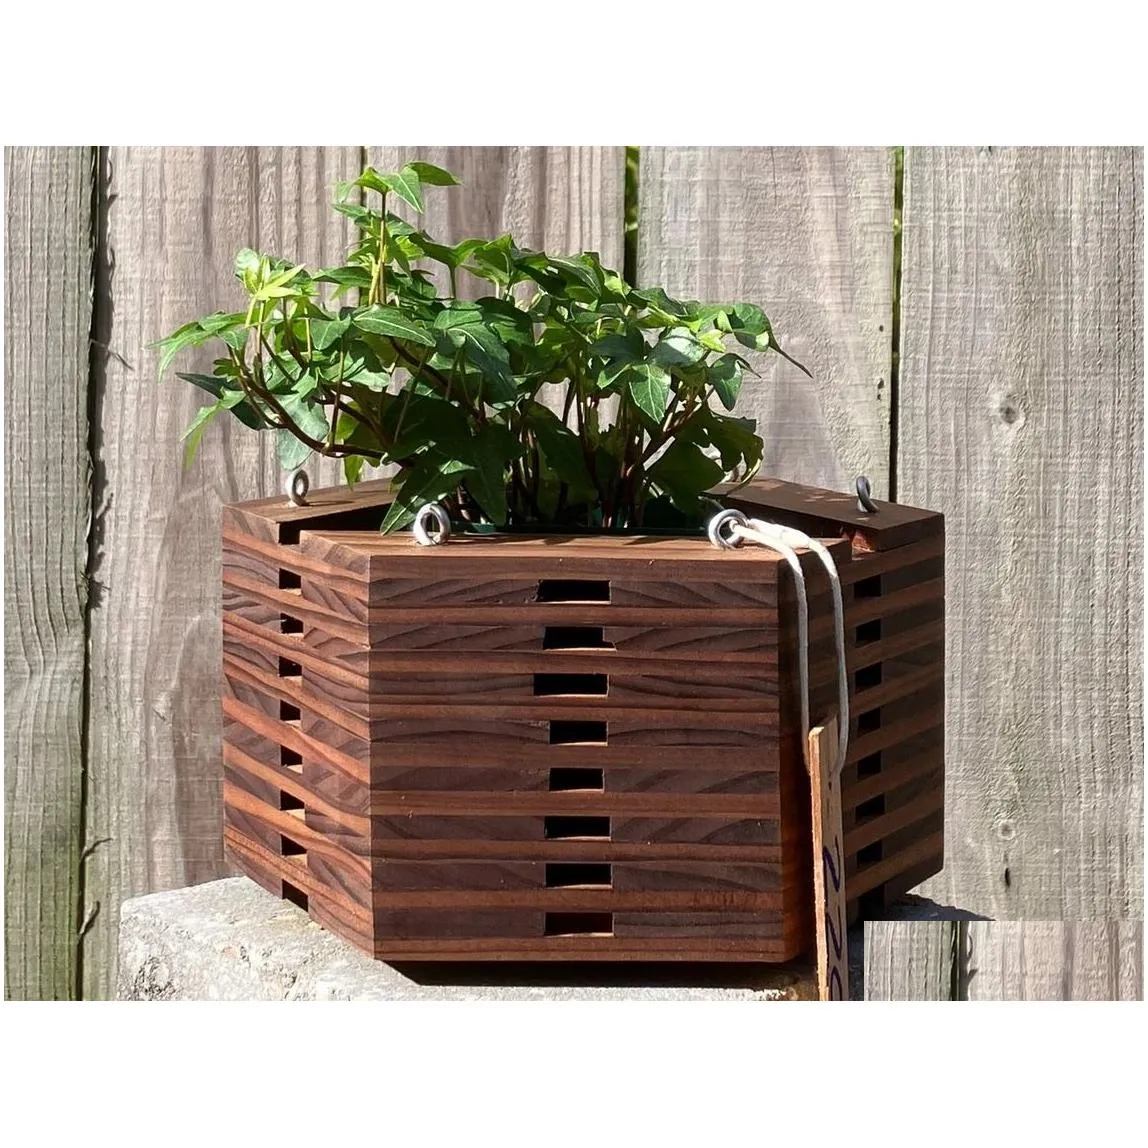 salvaged wood hanging basket planter for orchids bromeliads other epiphytes and succulents